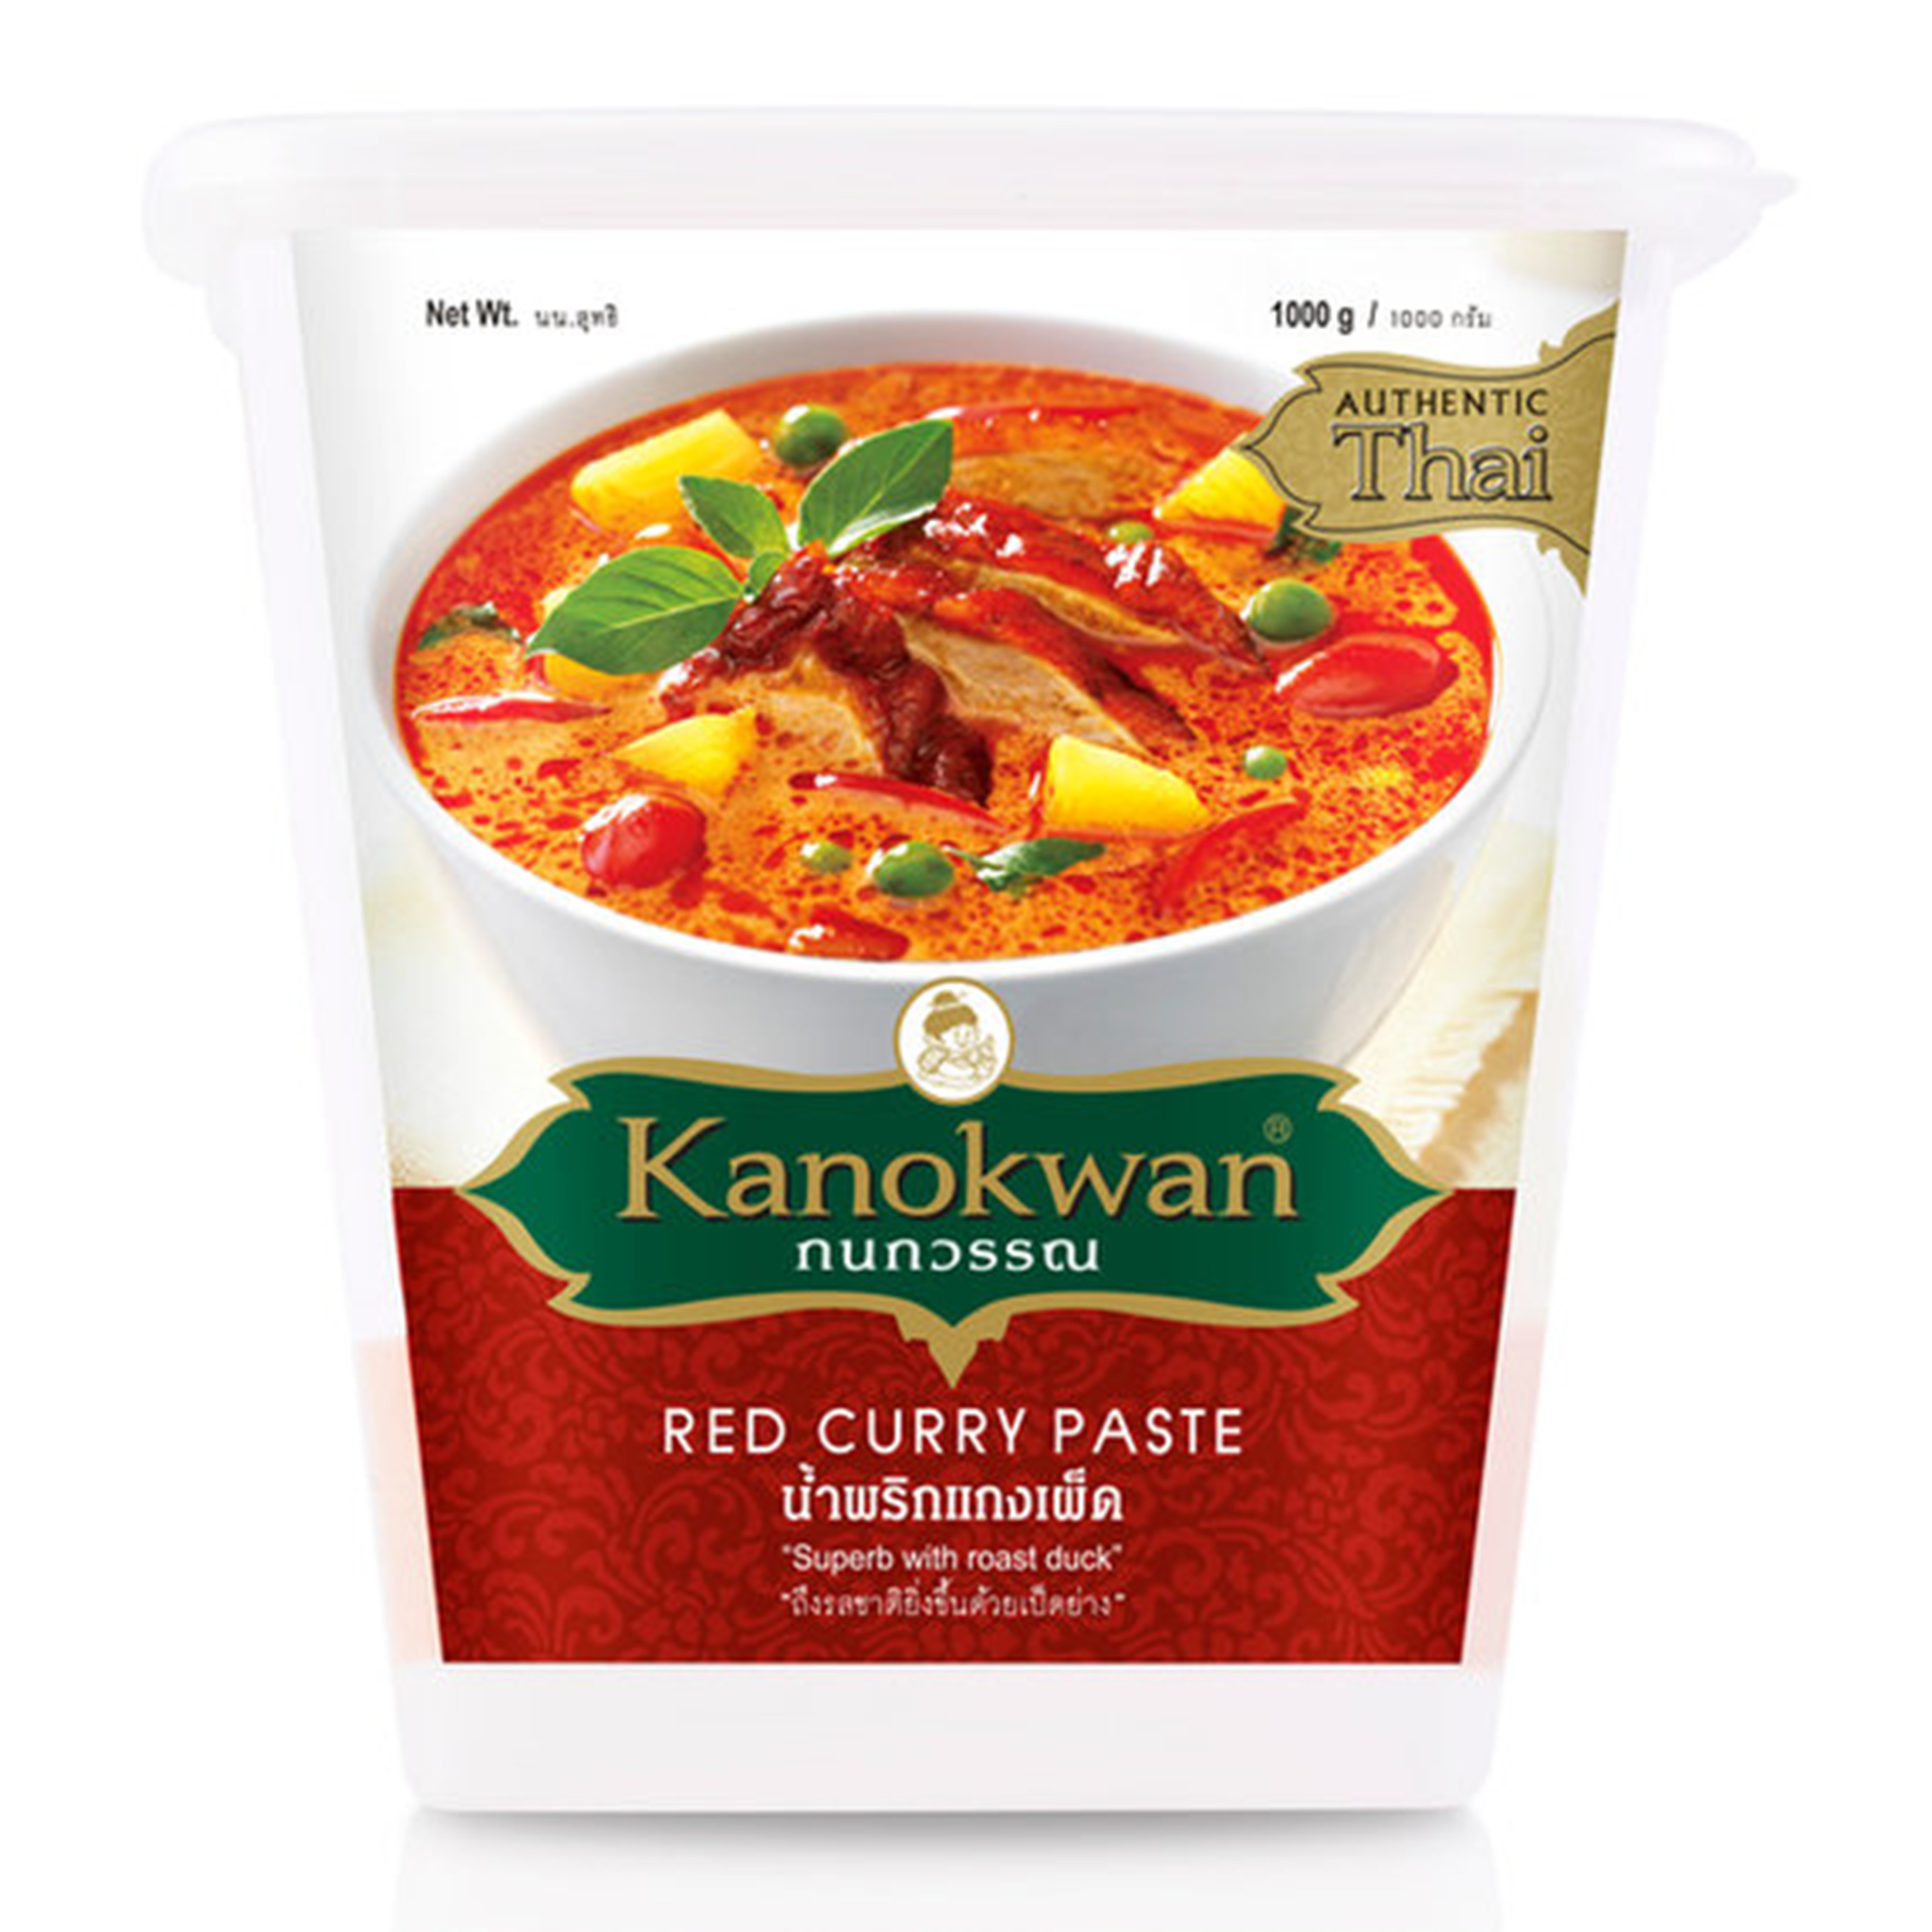 Thai Red Curry Paste 1kg tub by Kanokwan